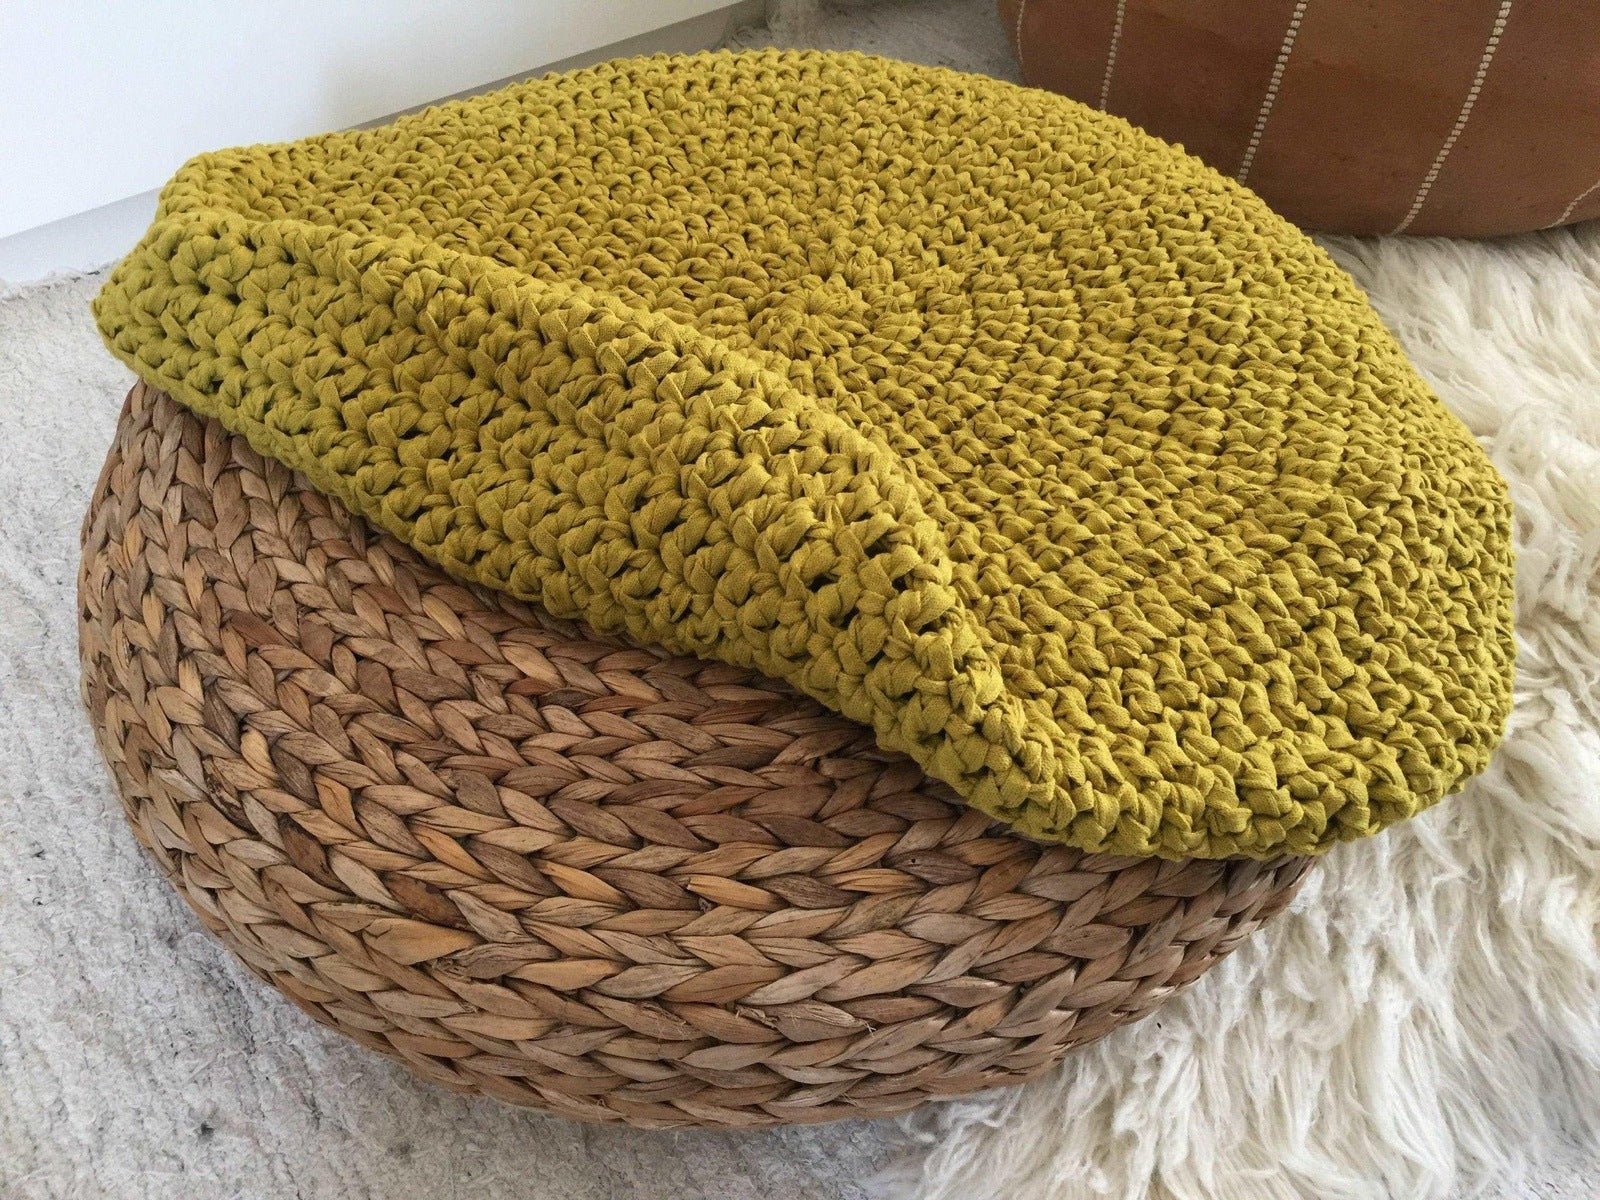 Ikea Alseda Pouf Cover, Knitted Pouf Cover - Looping Home